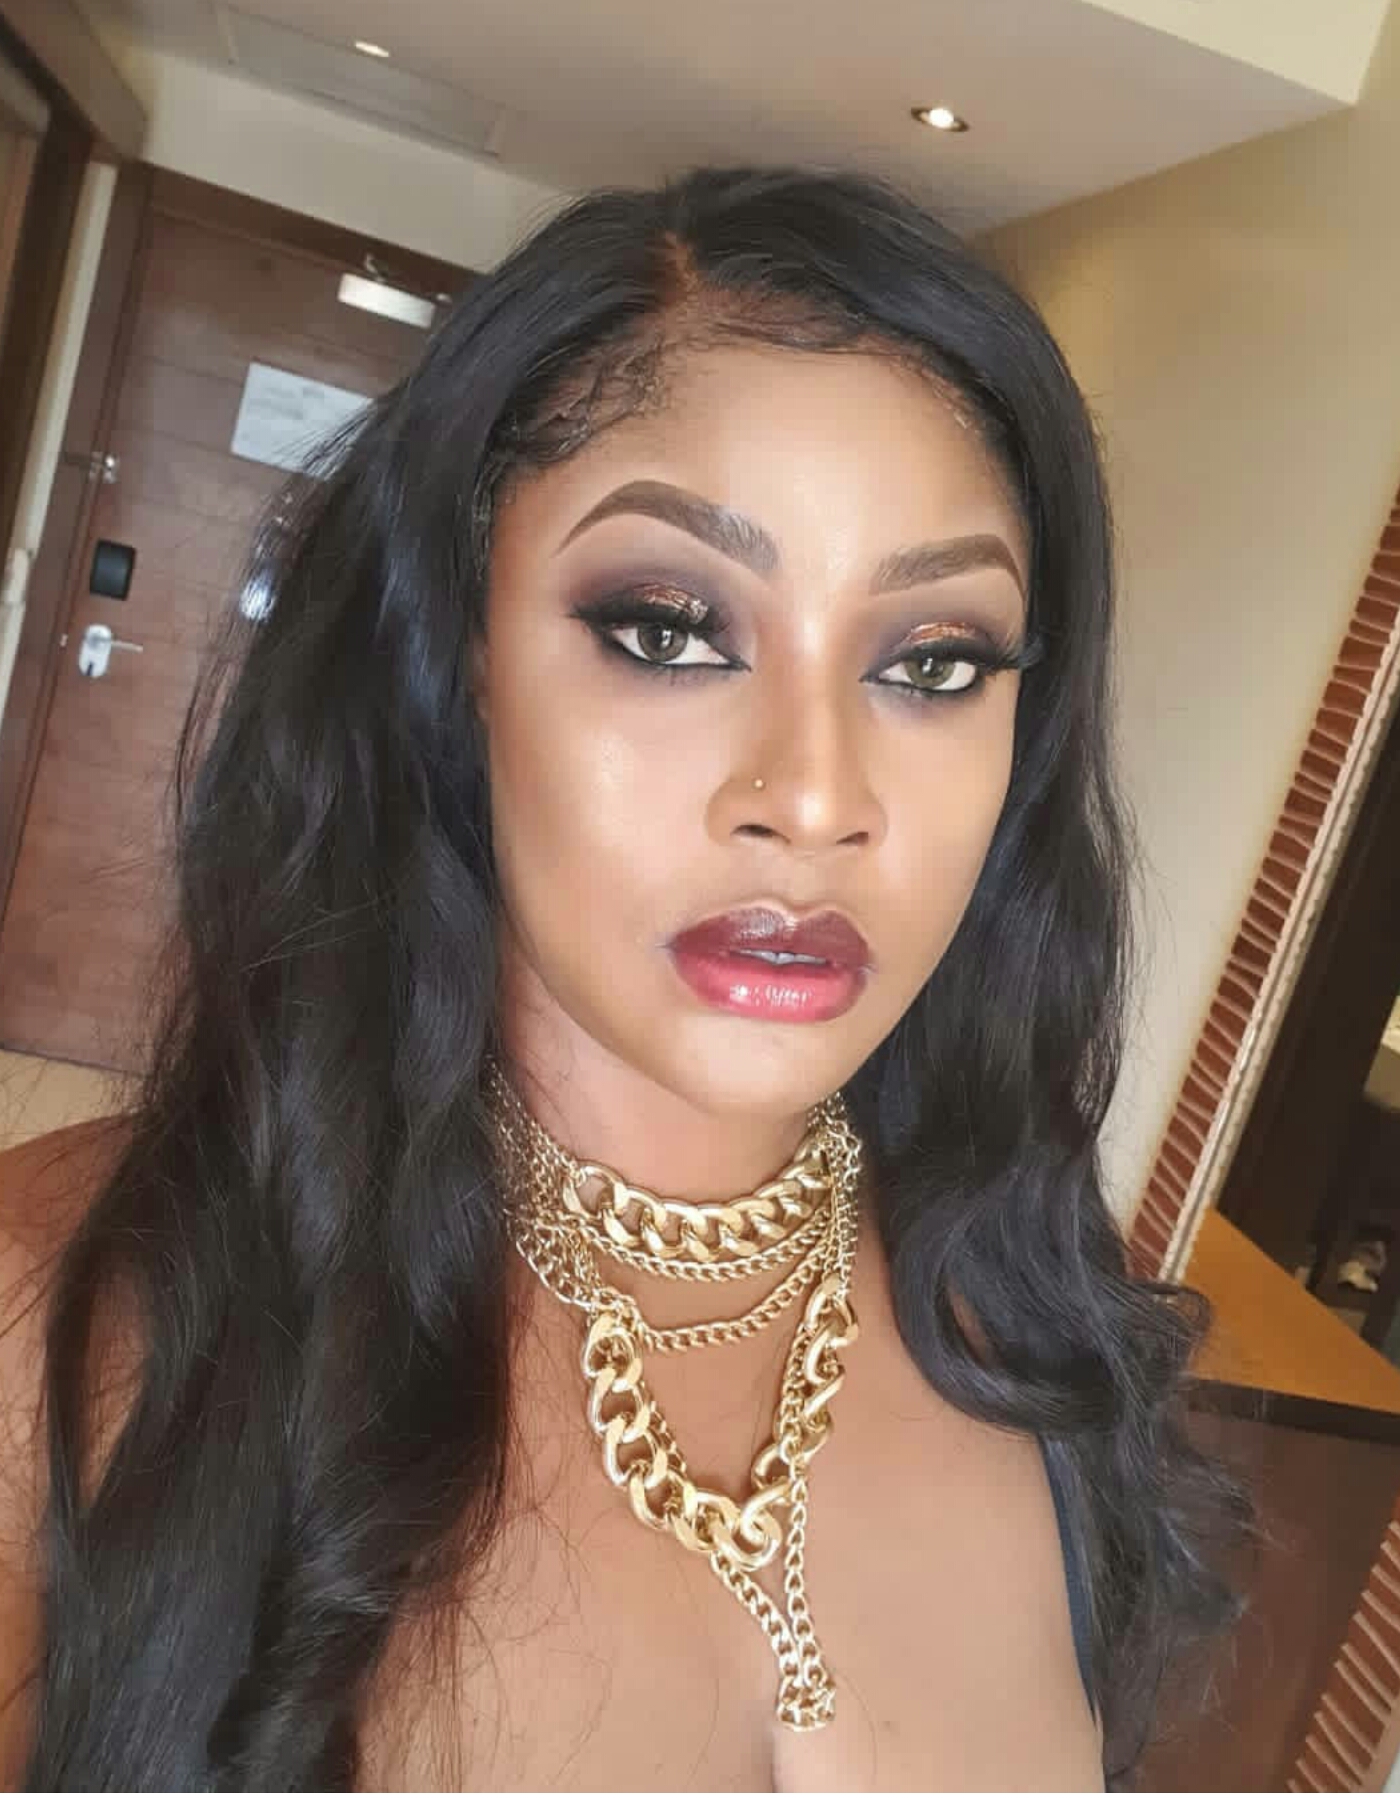 Angela Okorie discloses the kind of people who get hurt the most